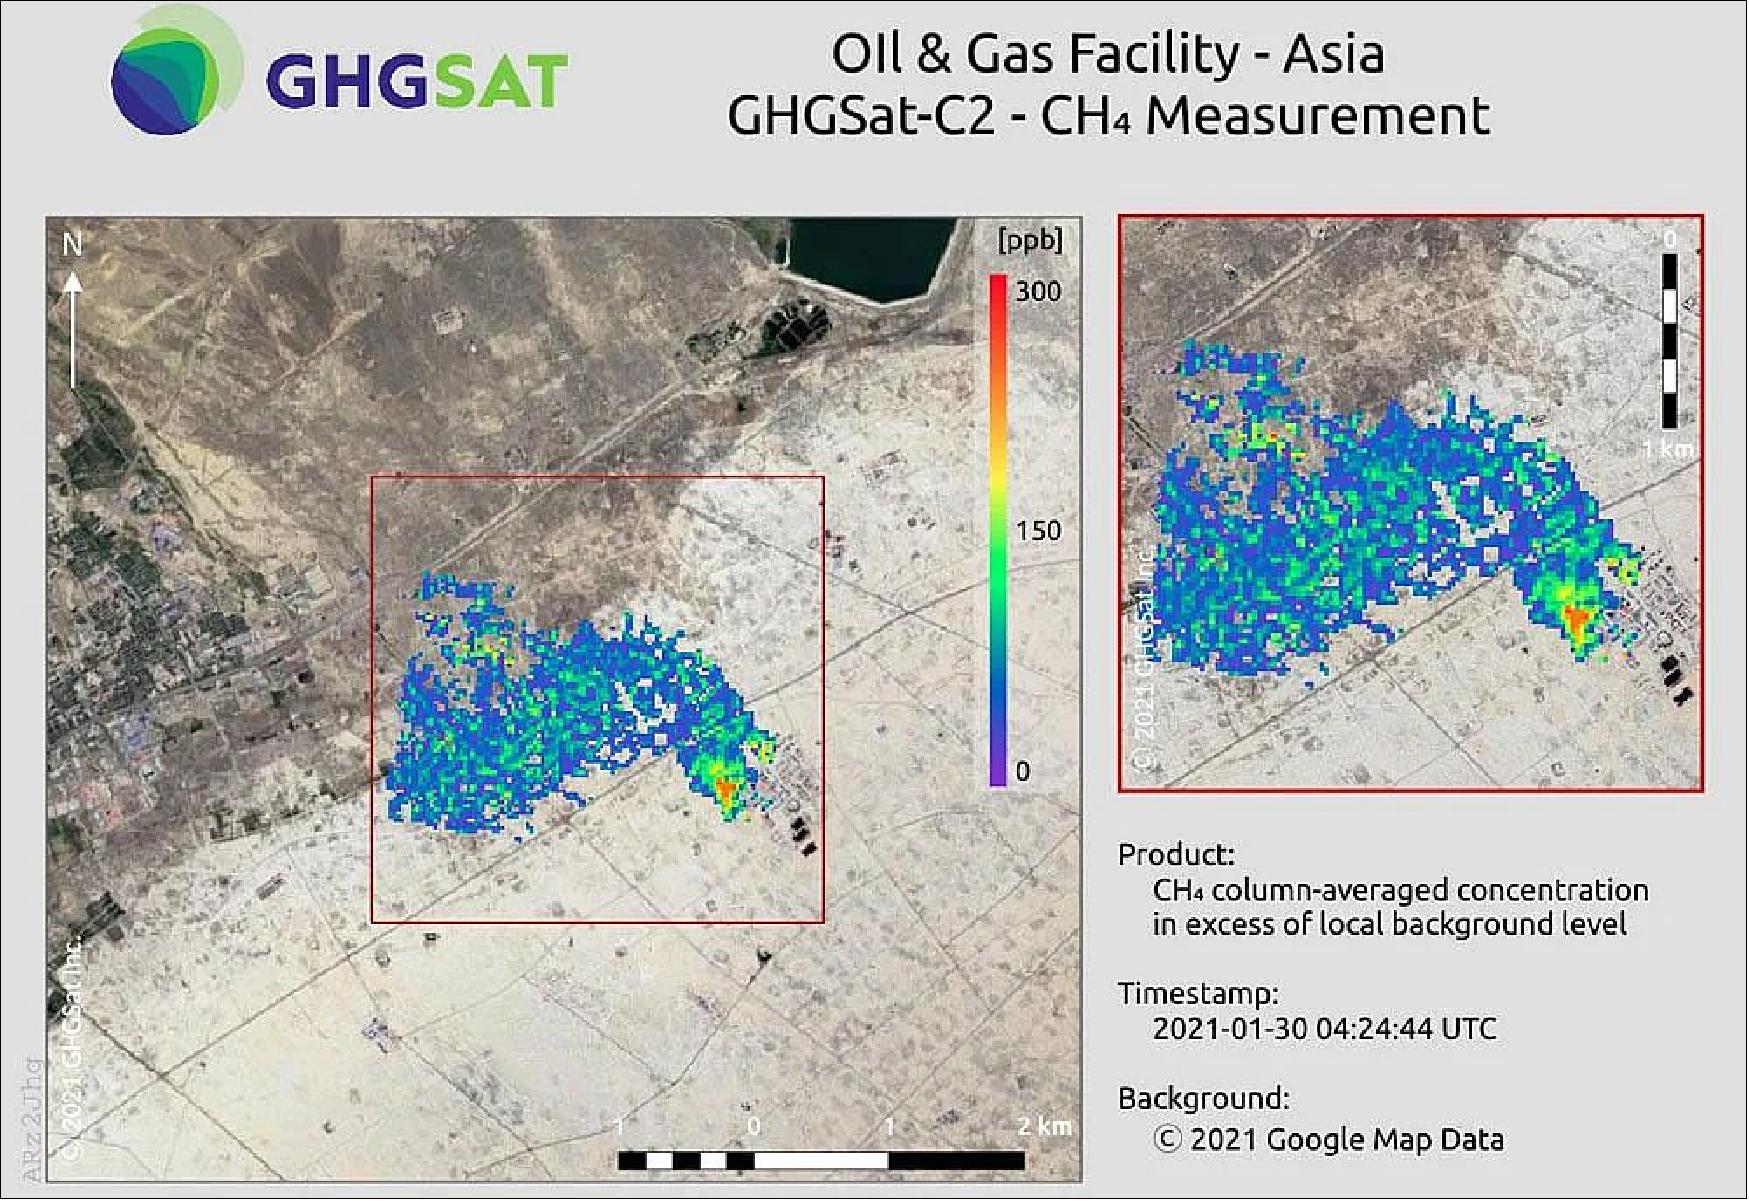 Figure 14: The new satellite detected a methane plume from an oil and gas facility while overflying Asia (image credit: GHGSat)